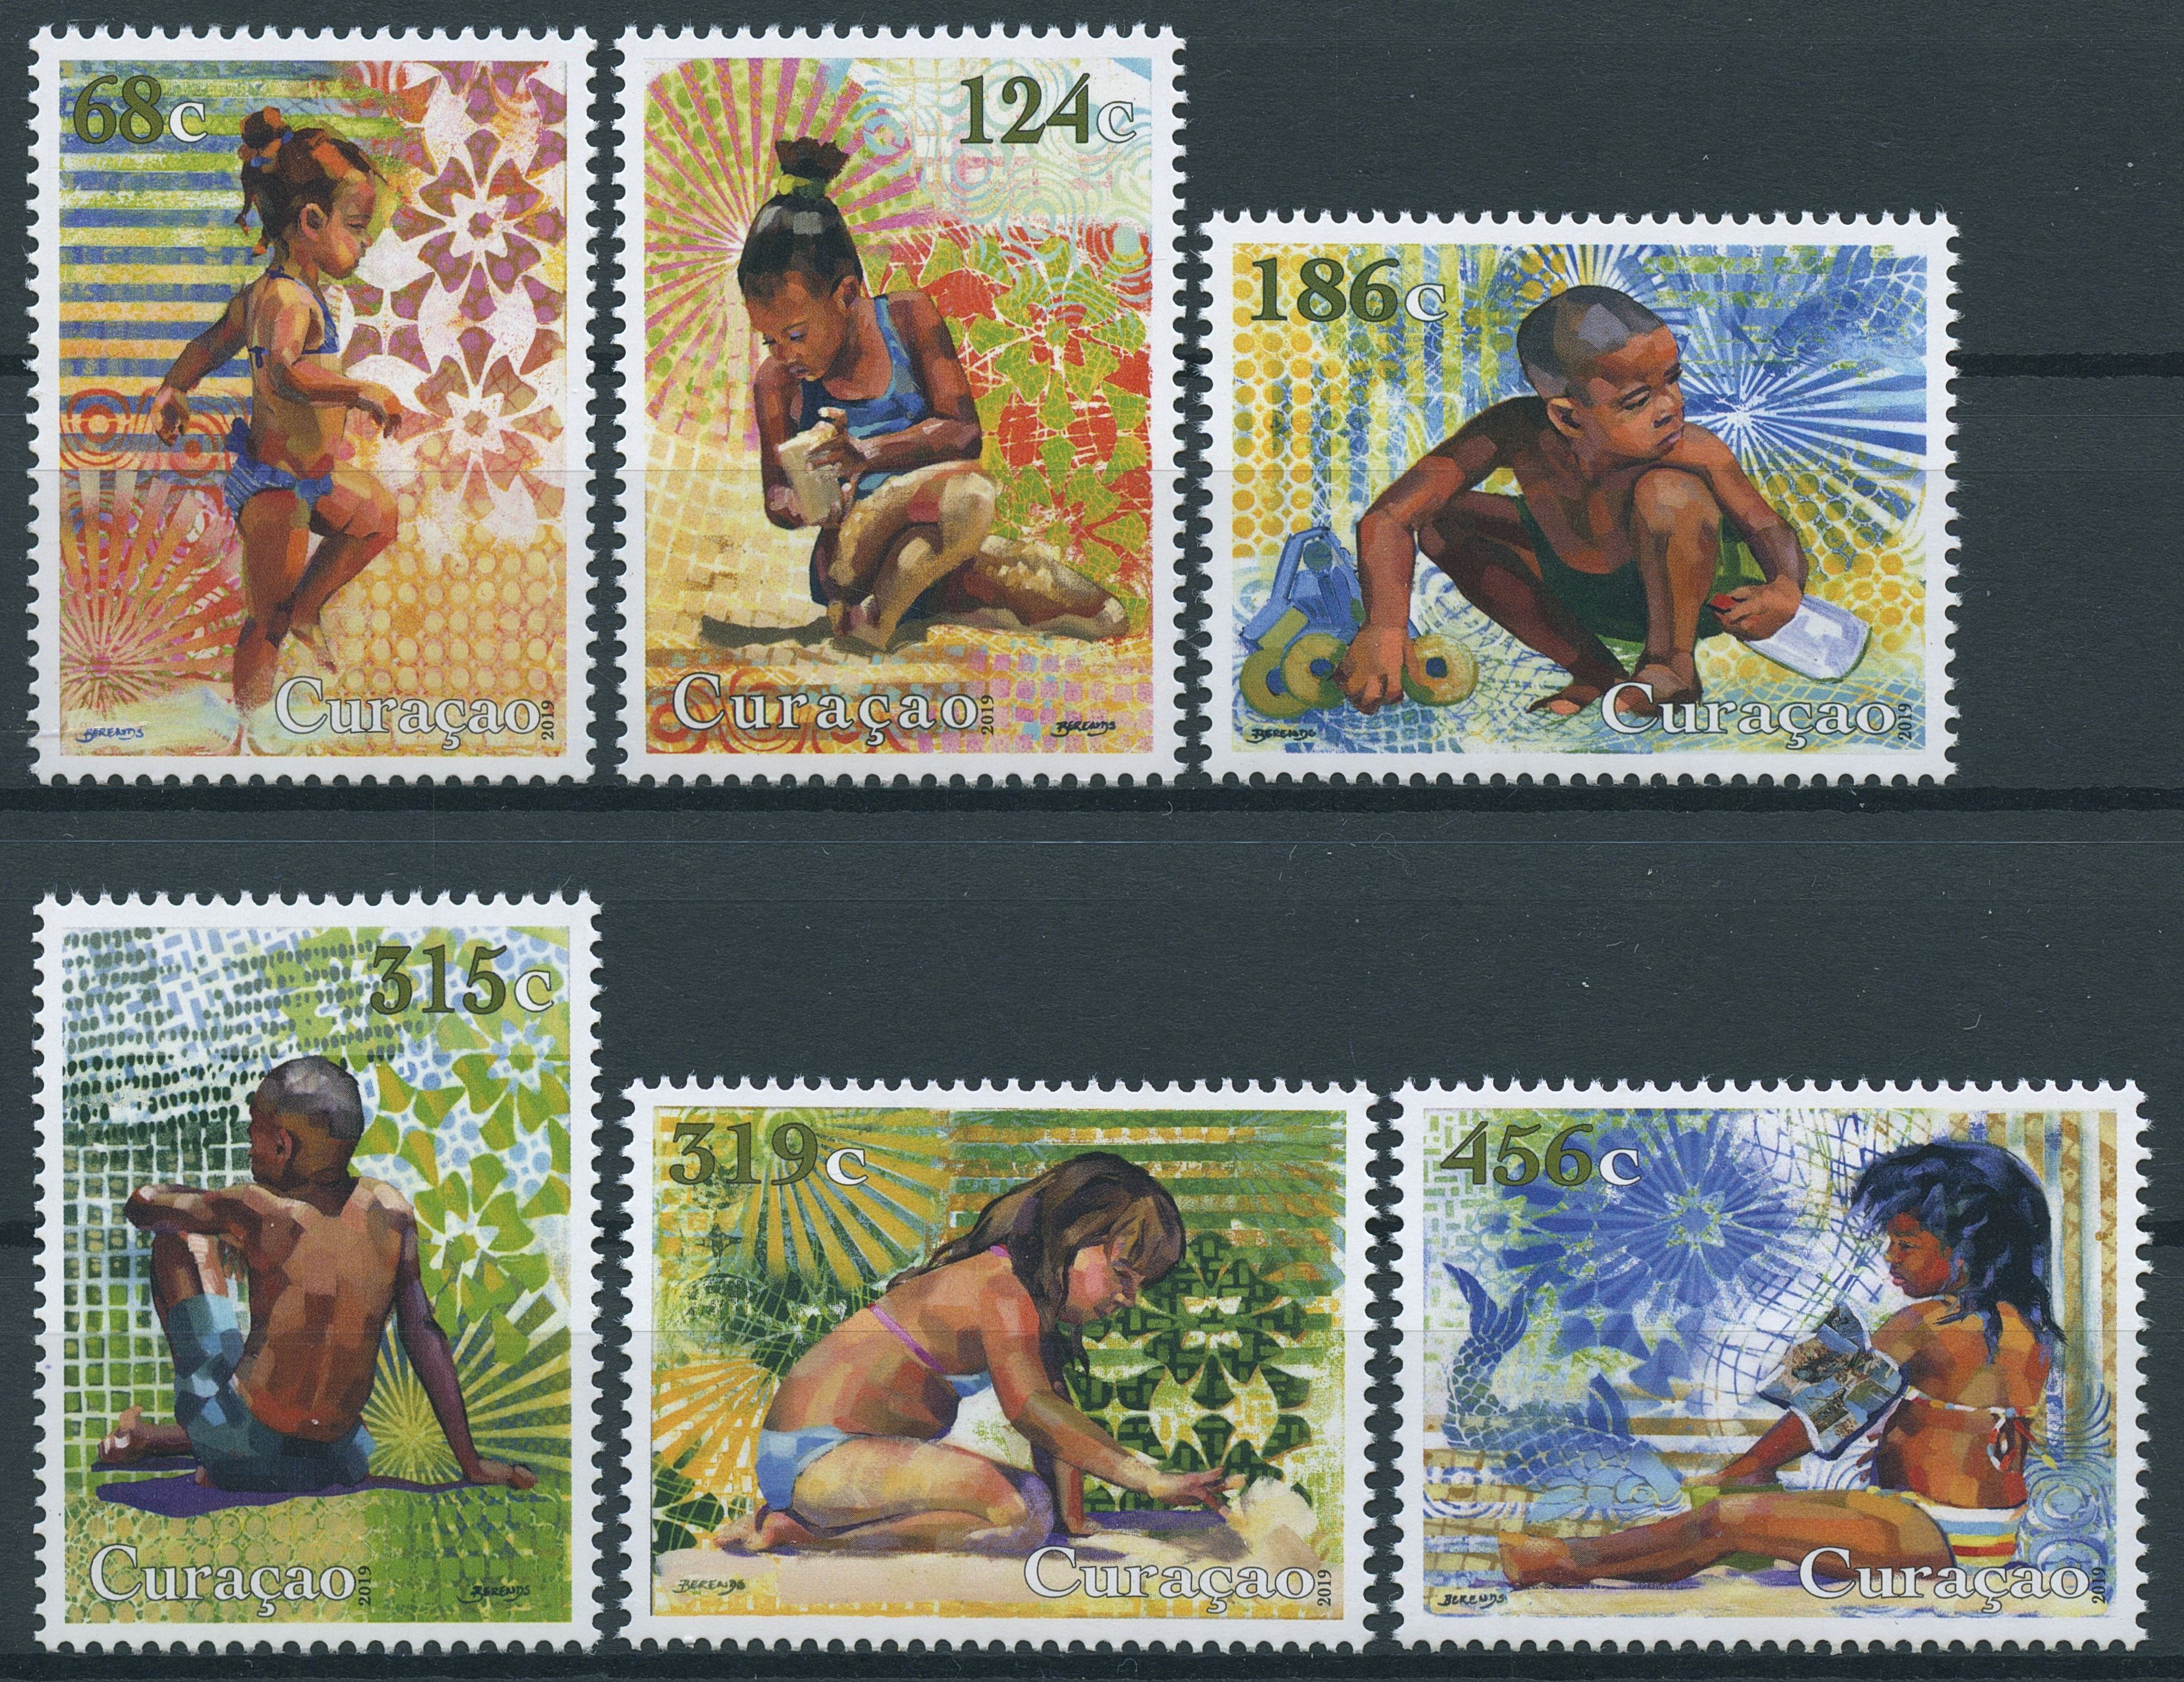 Curacao Childrens Stamps 2019 MNH Youth Series Cultures & Traditions 6v Set